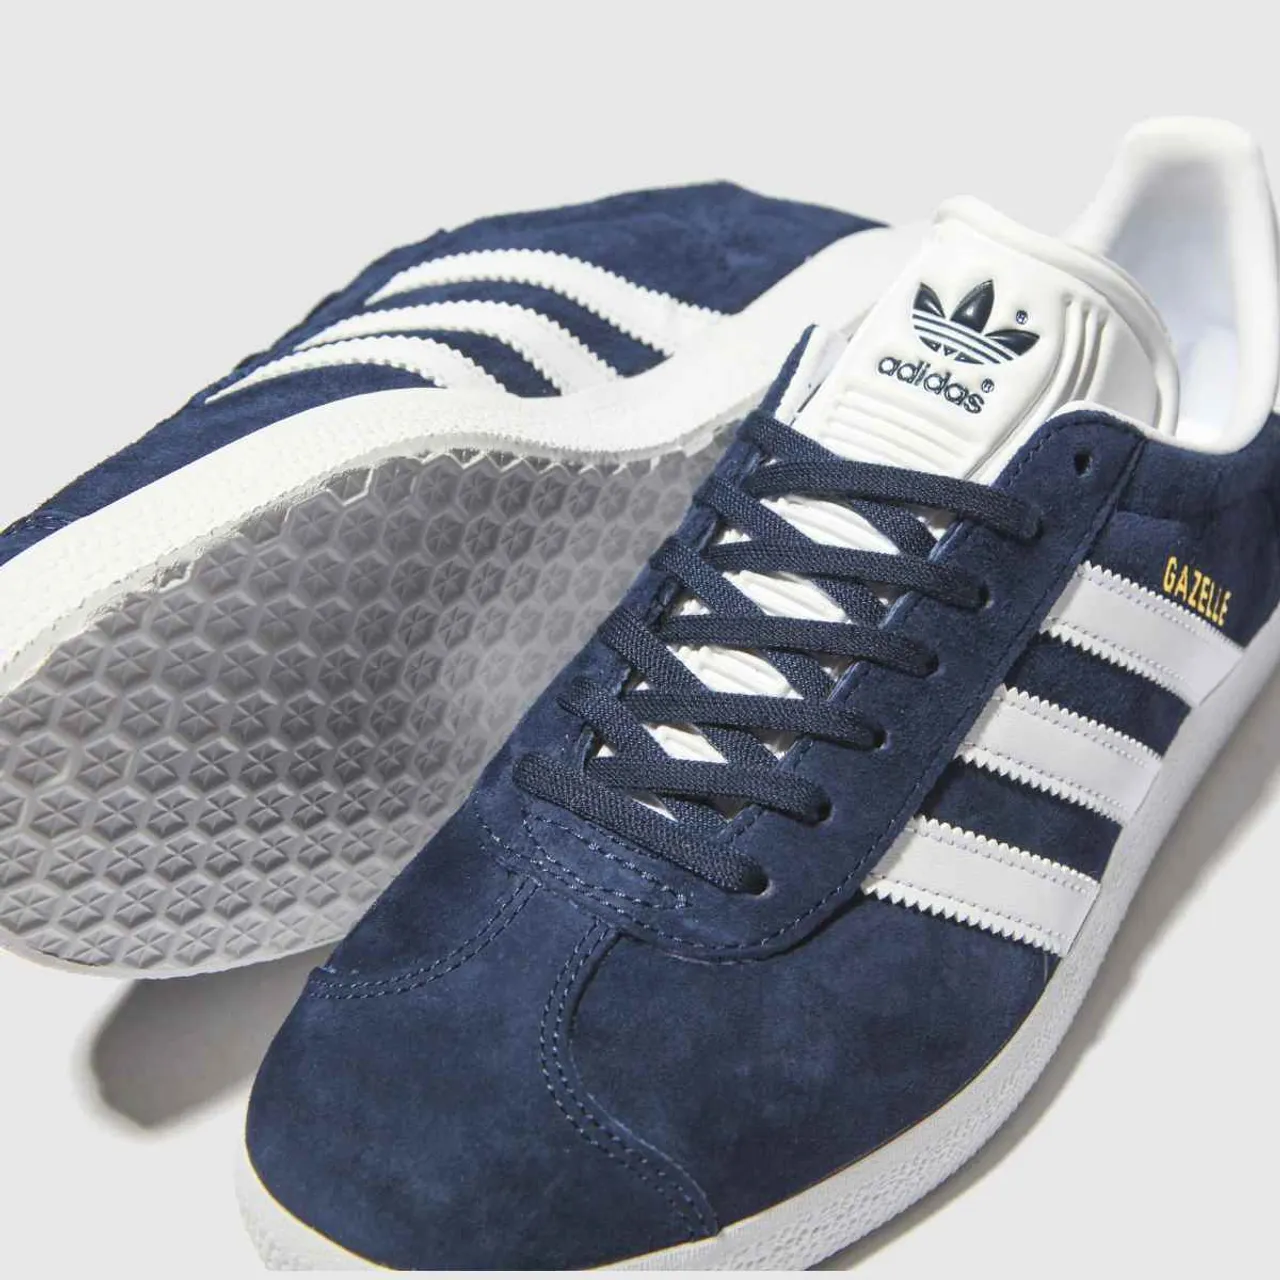 Adidas Gazelle Trainers In Navy & White